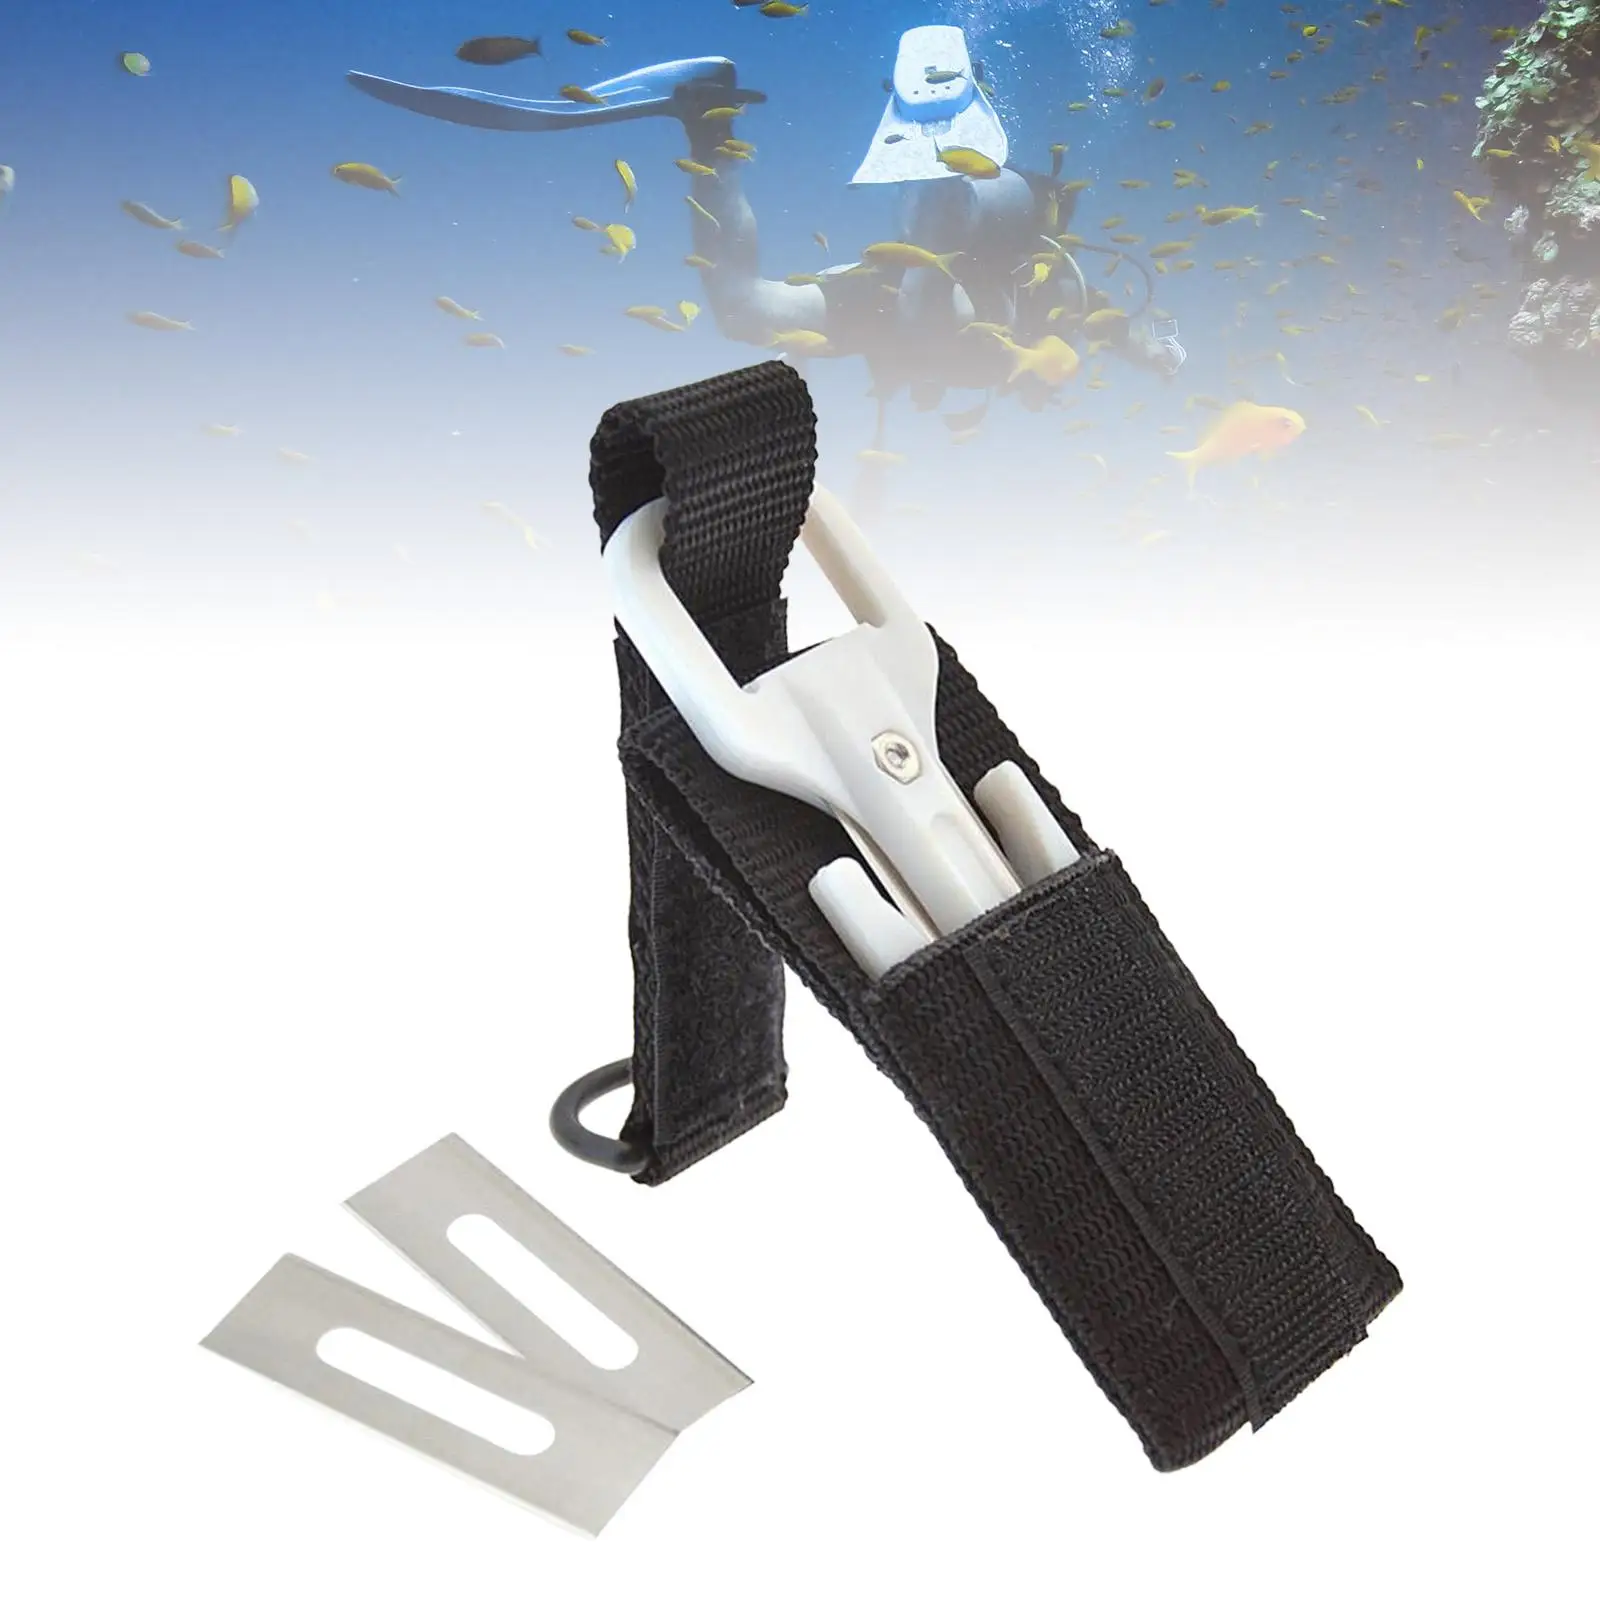 Nylon Scuba Dive Line Cutter Cutting Tool with Webbing Snorkeling Knives for Spear Fishing Underwater Diving Emergency Surf